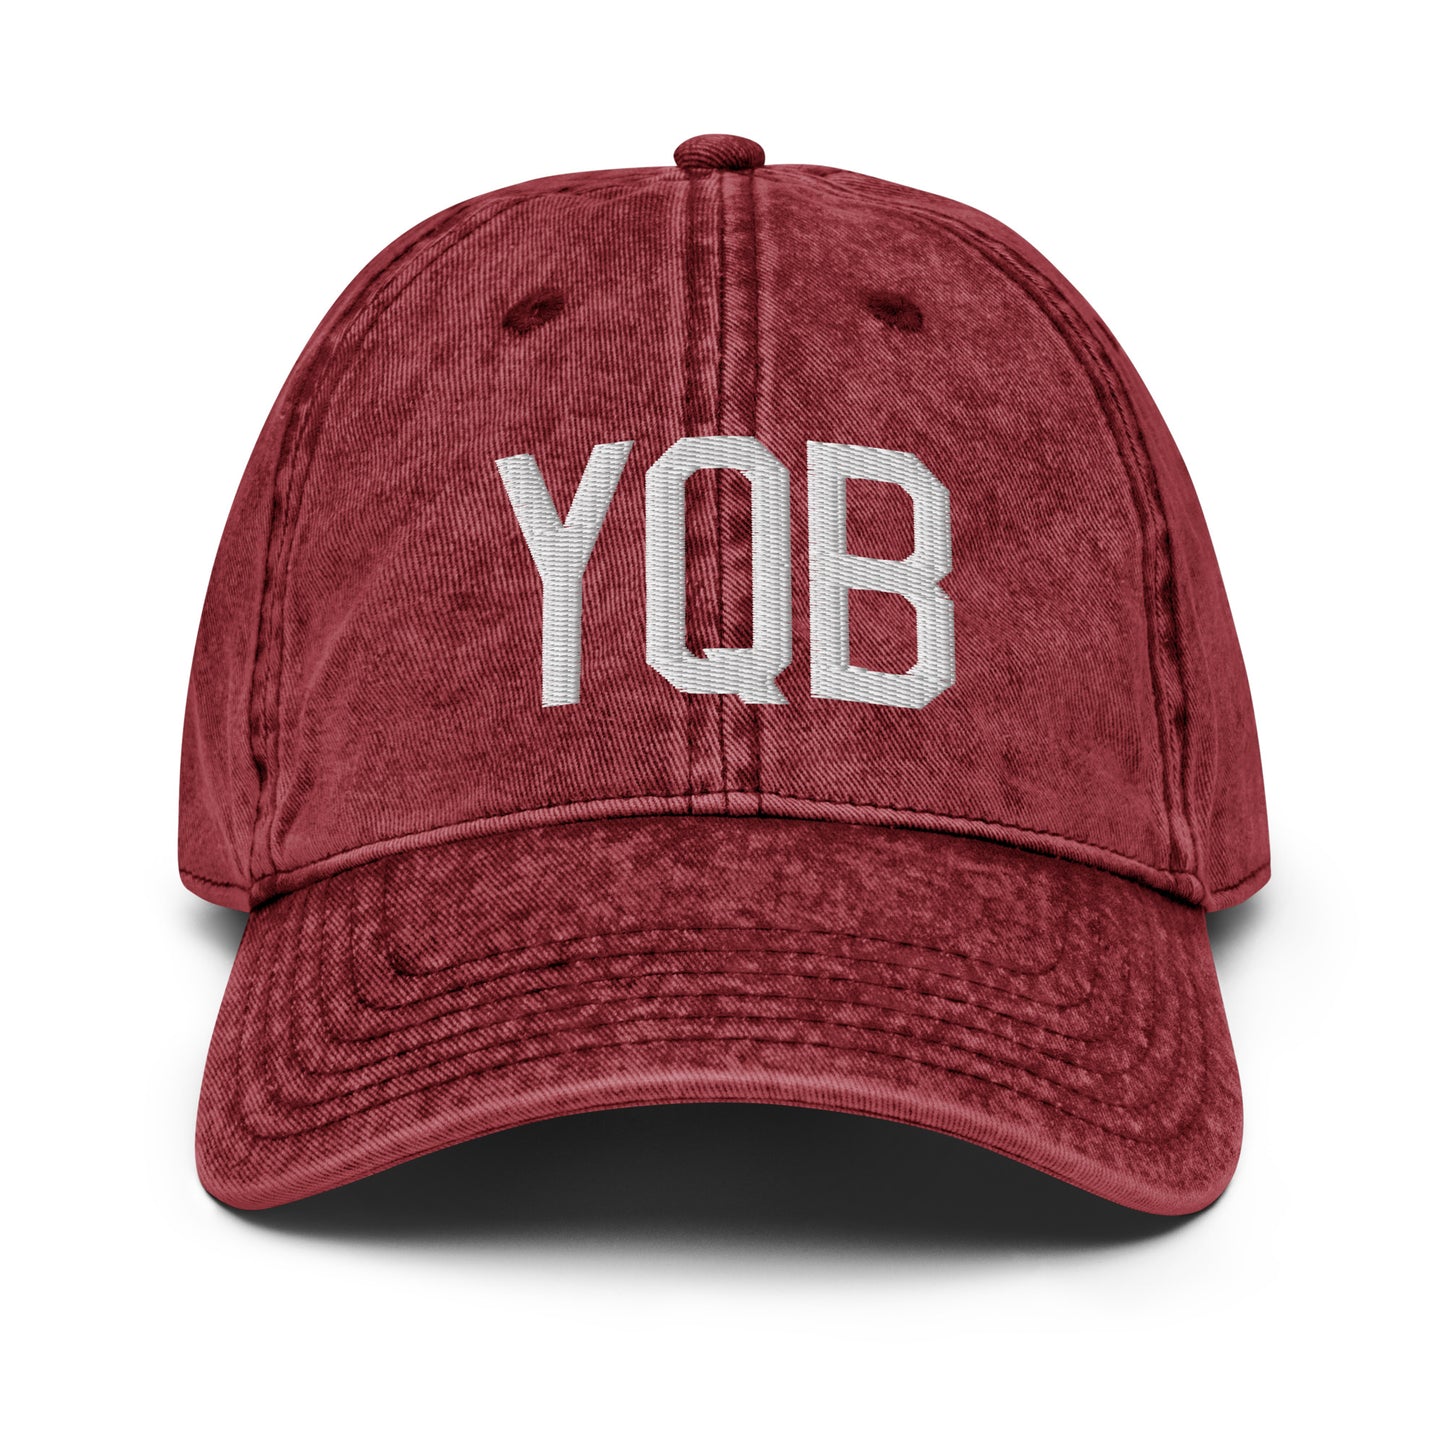 Airport Code Twill Cap - White • YQB Quebec City • YHM Designs - Image 19